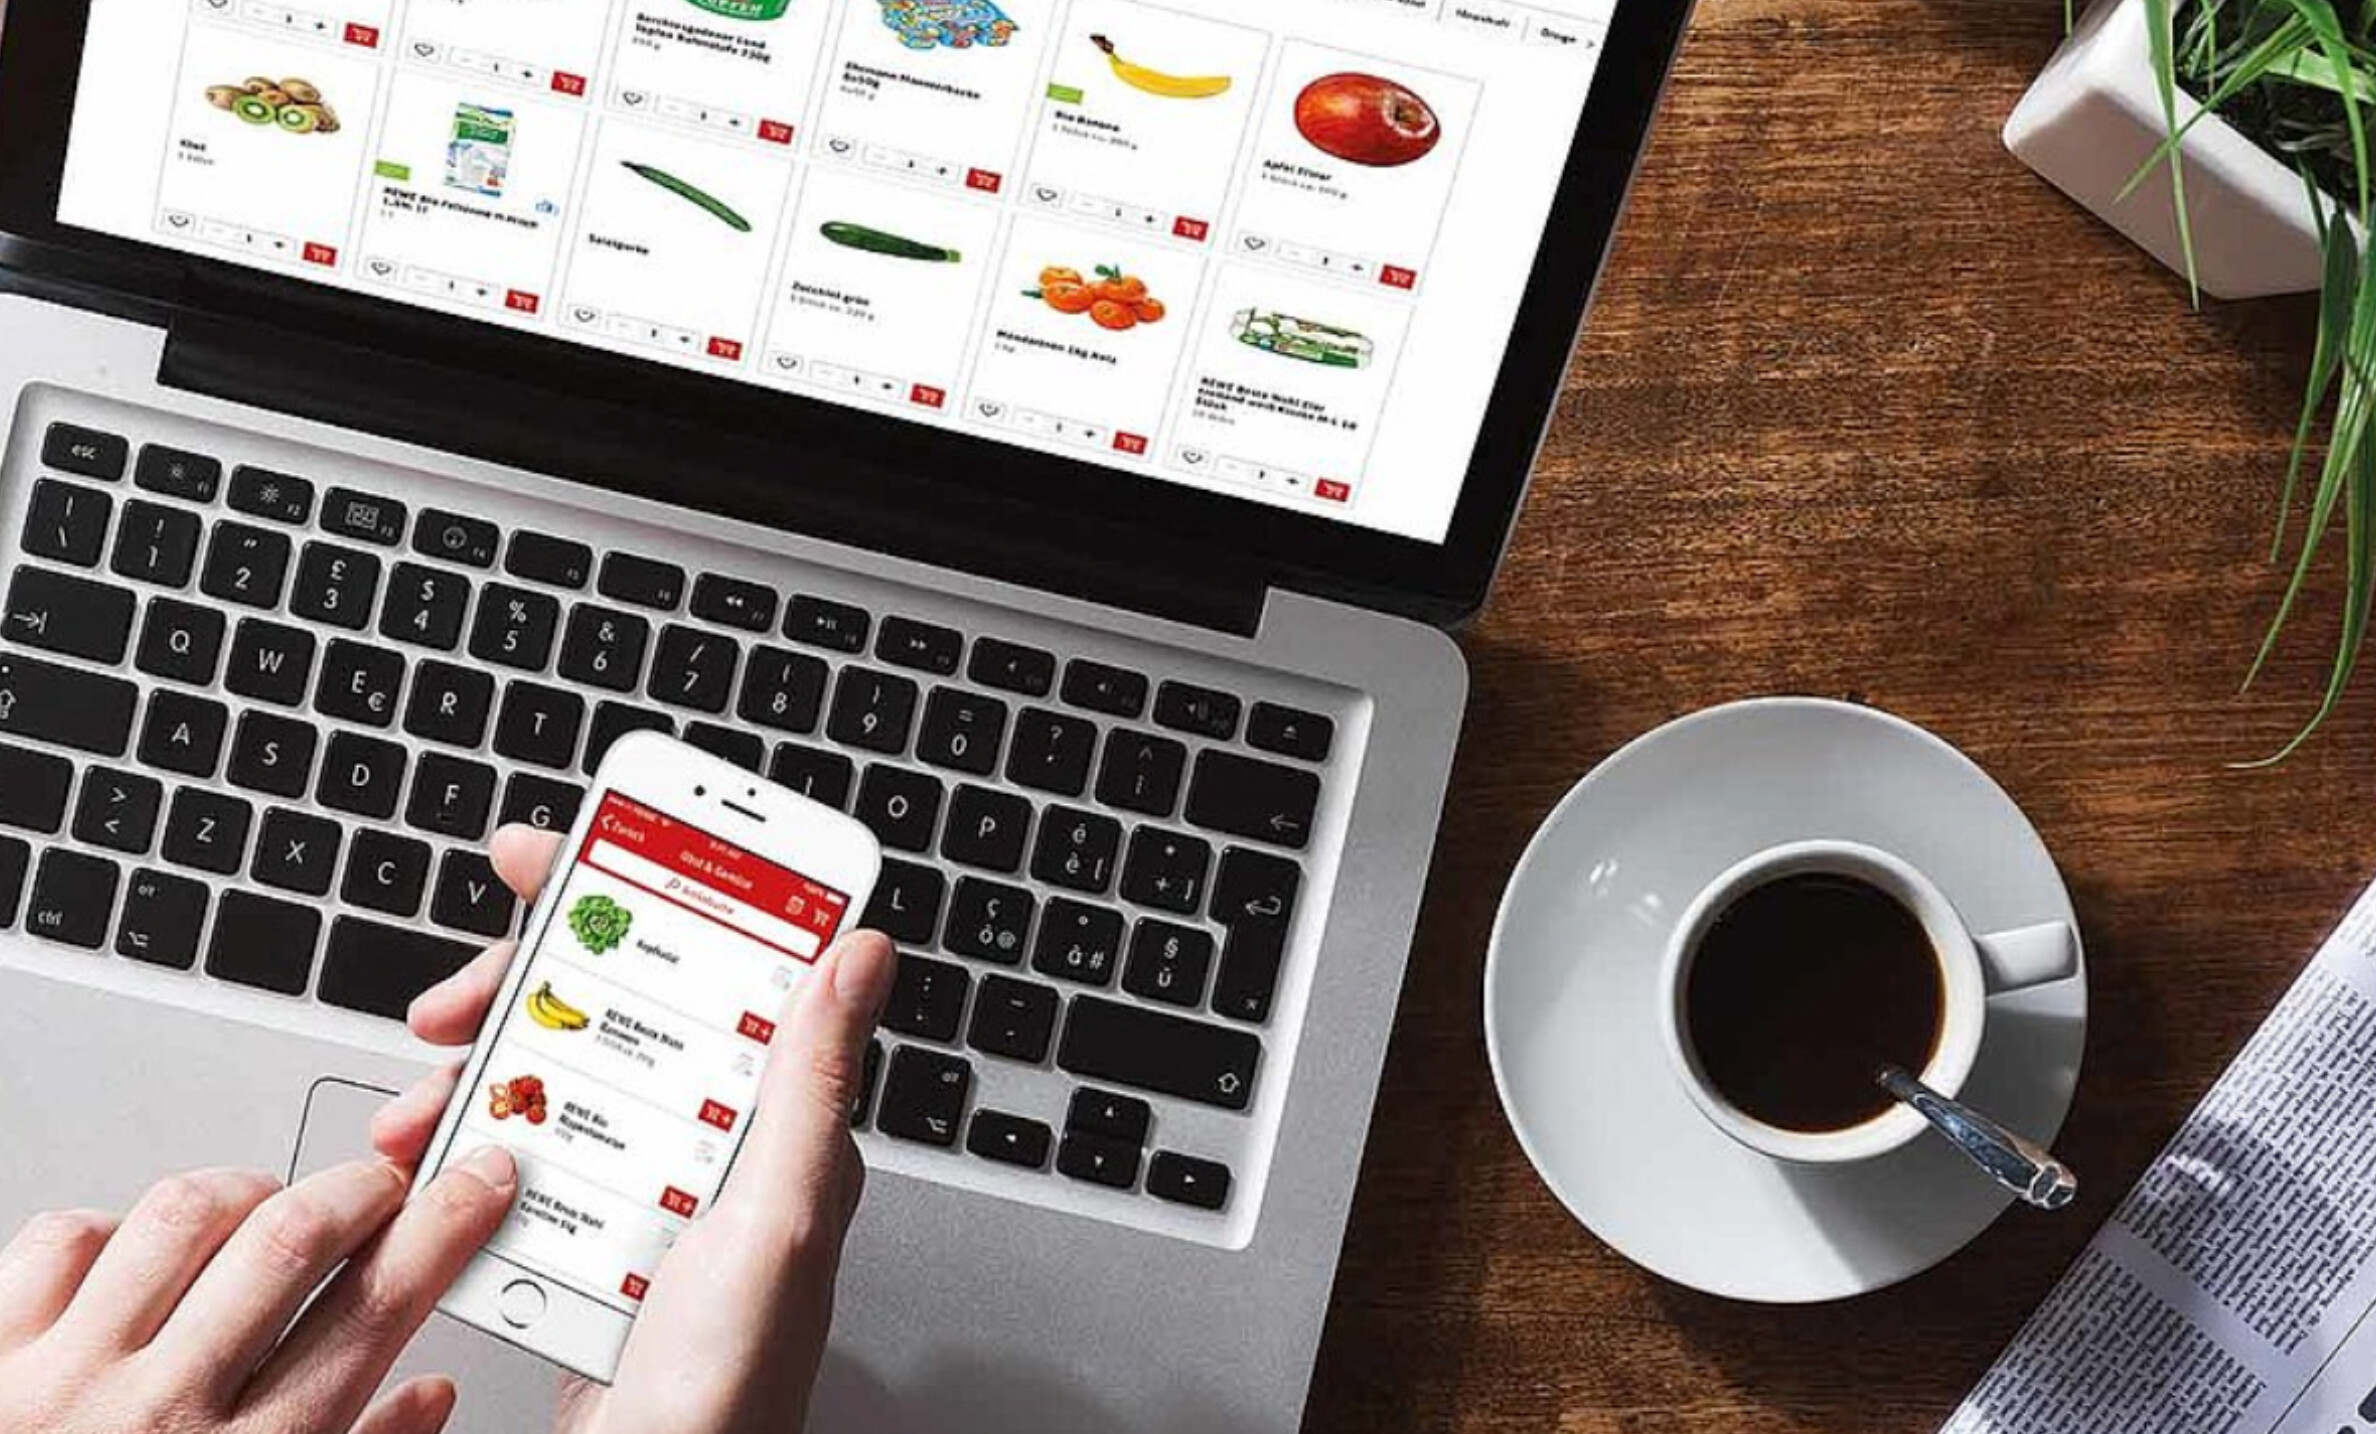 Tech perspective of an eFood Marketplace from REWE